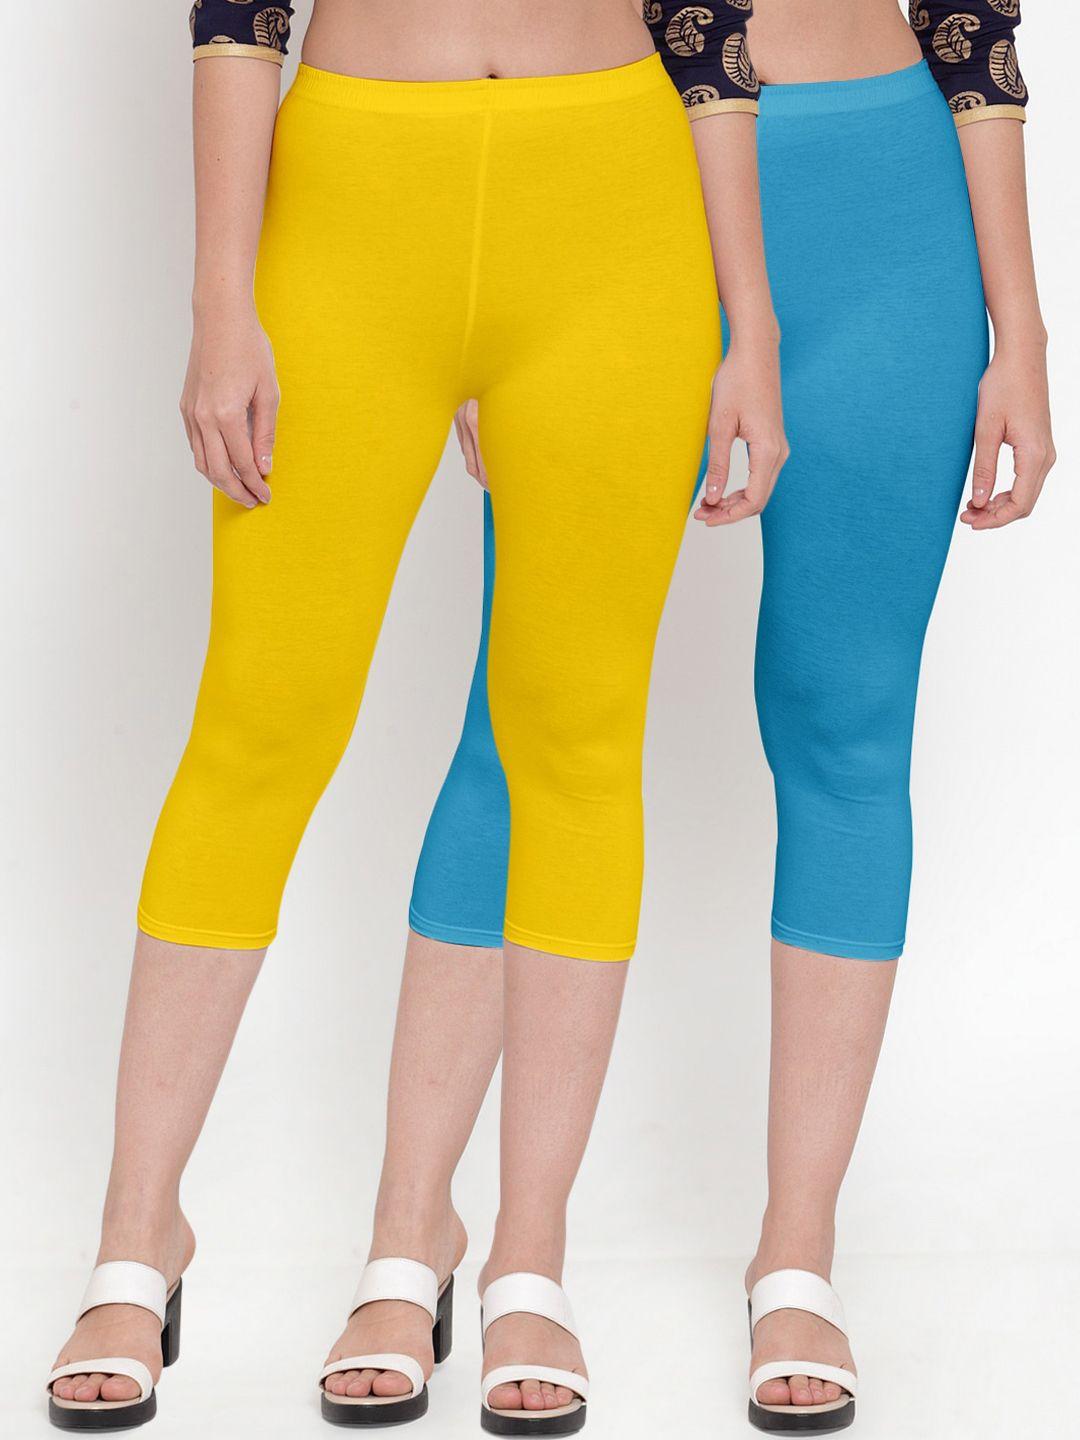 gracit women pack of 2 yellow & blue solid capris